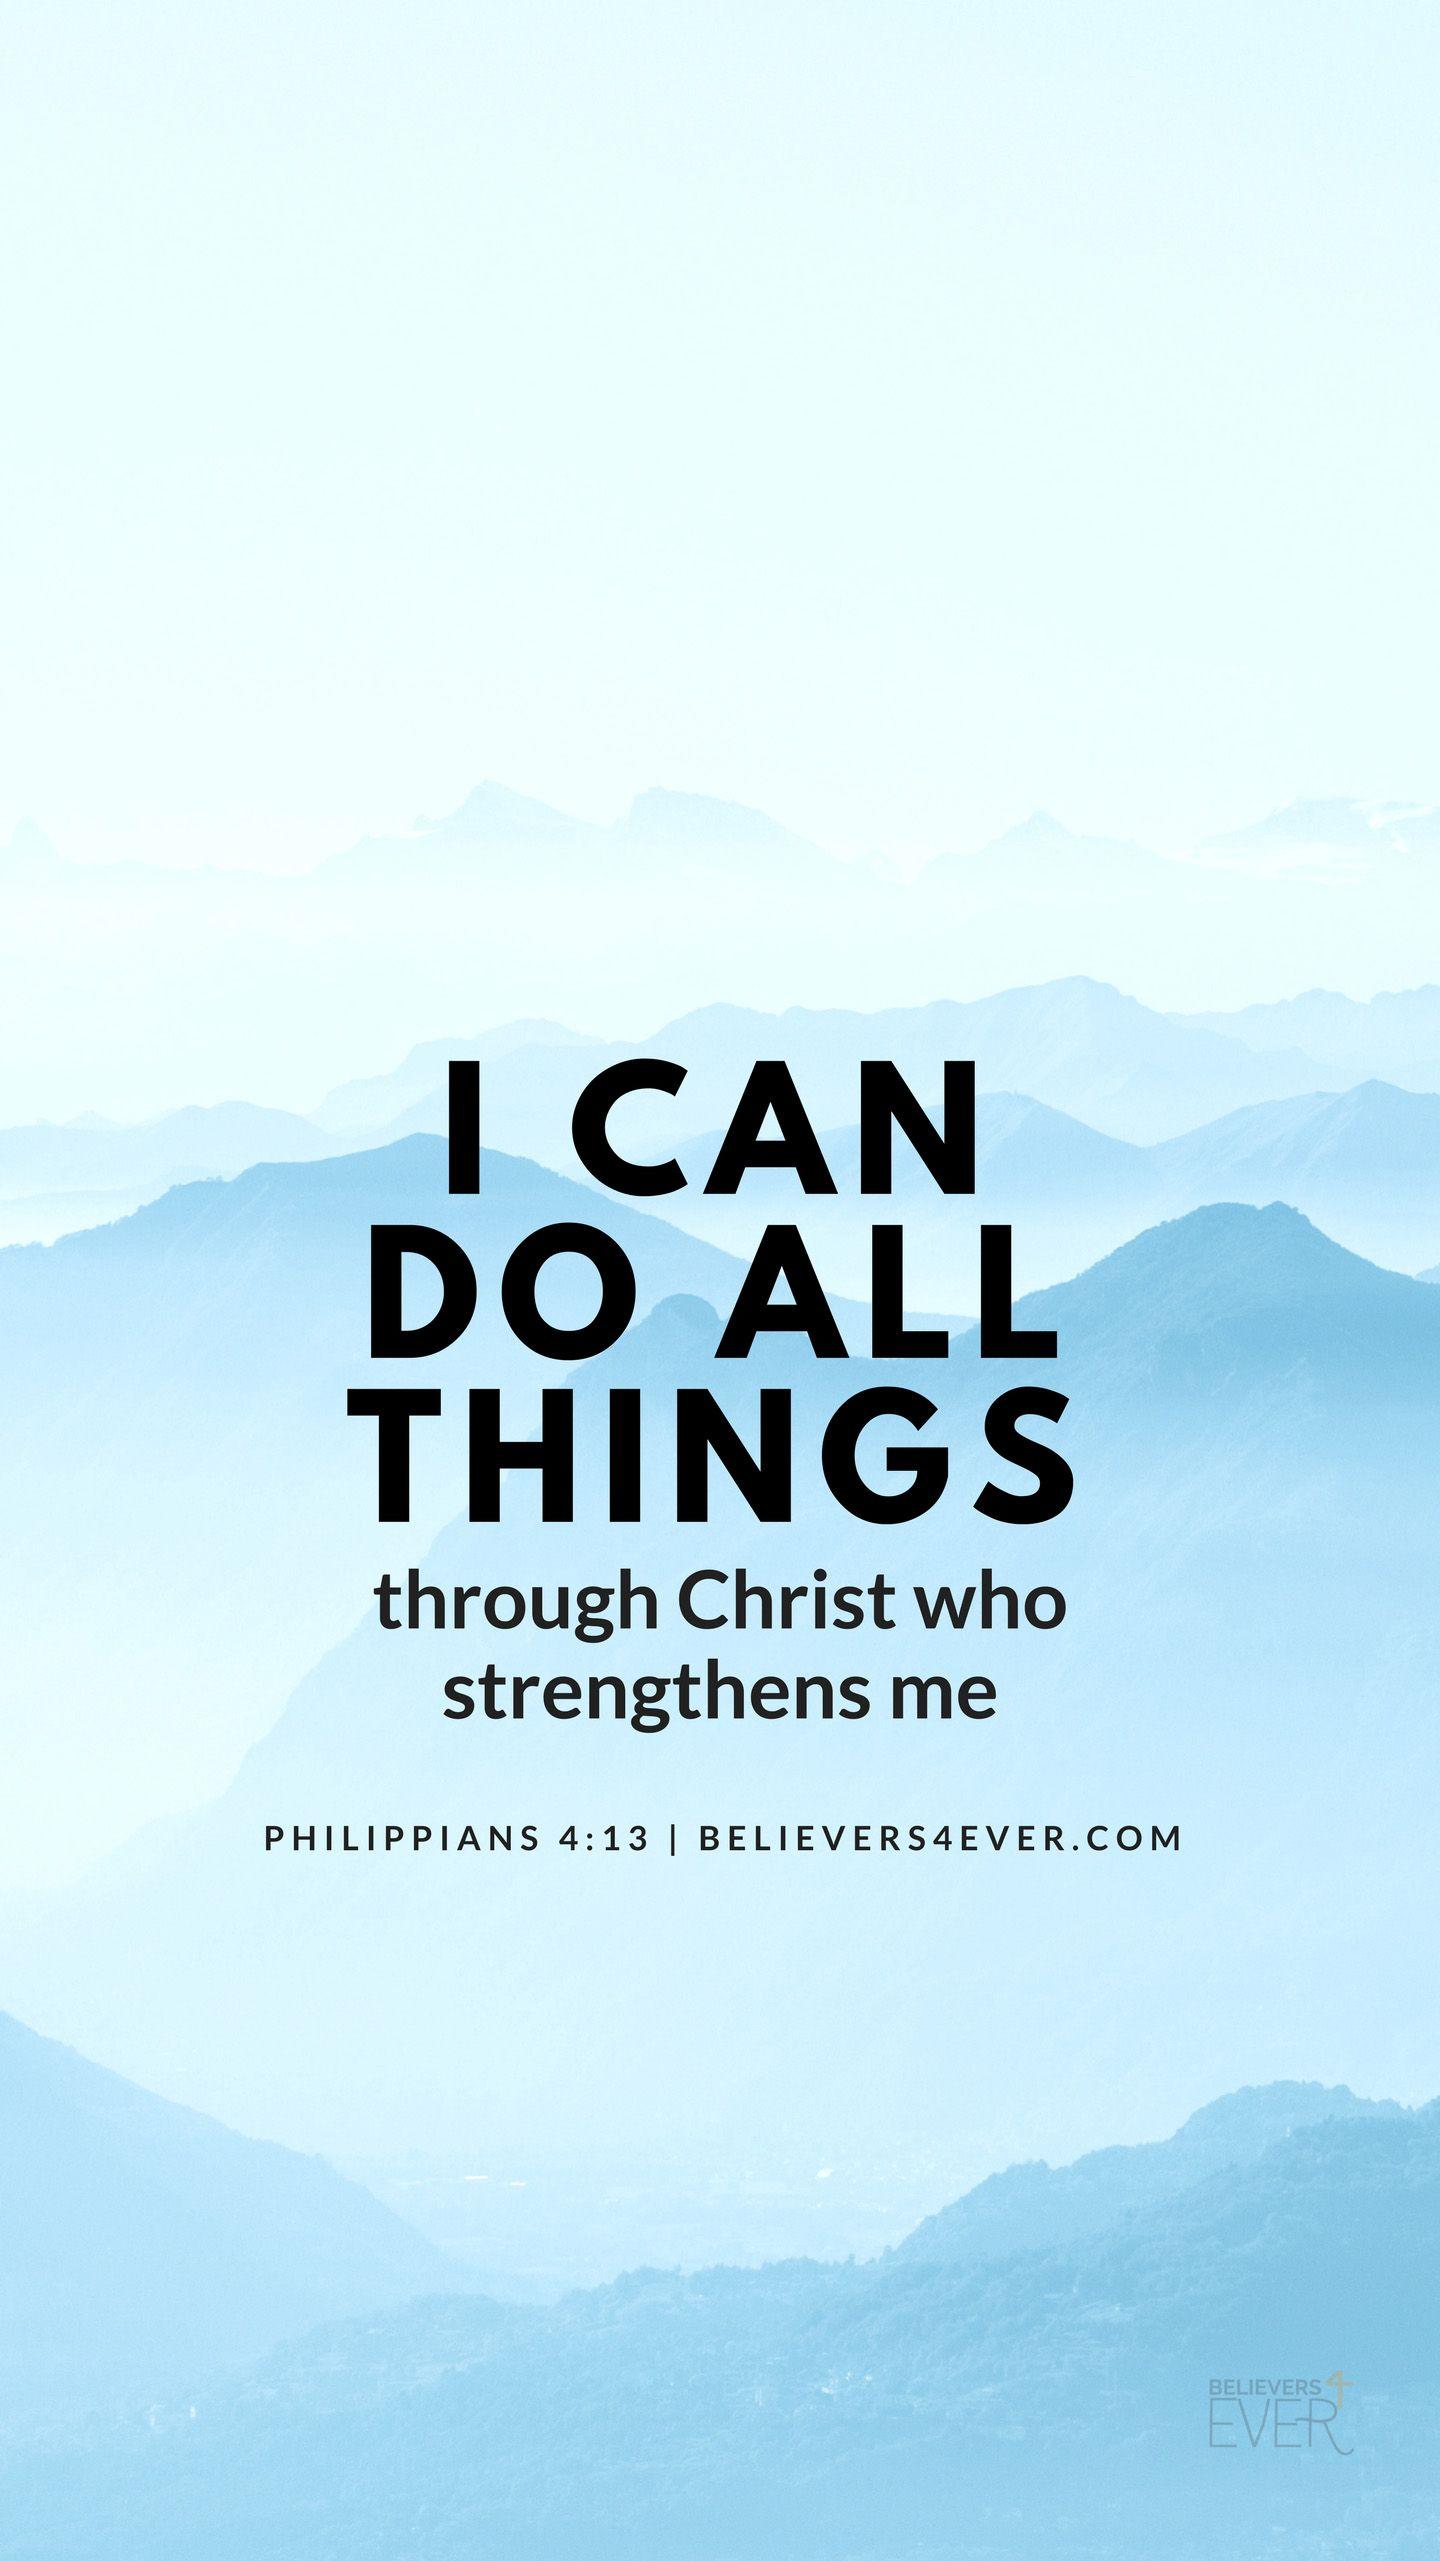 I can do all things. Bible quotes wallpaper, Bible